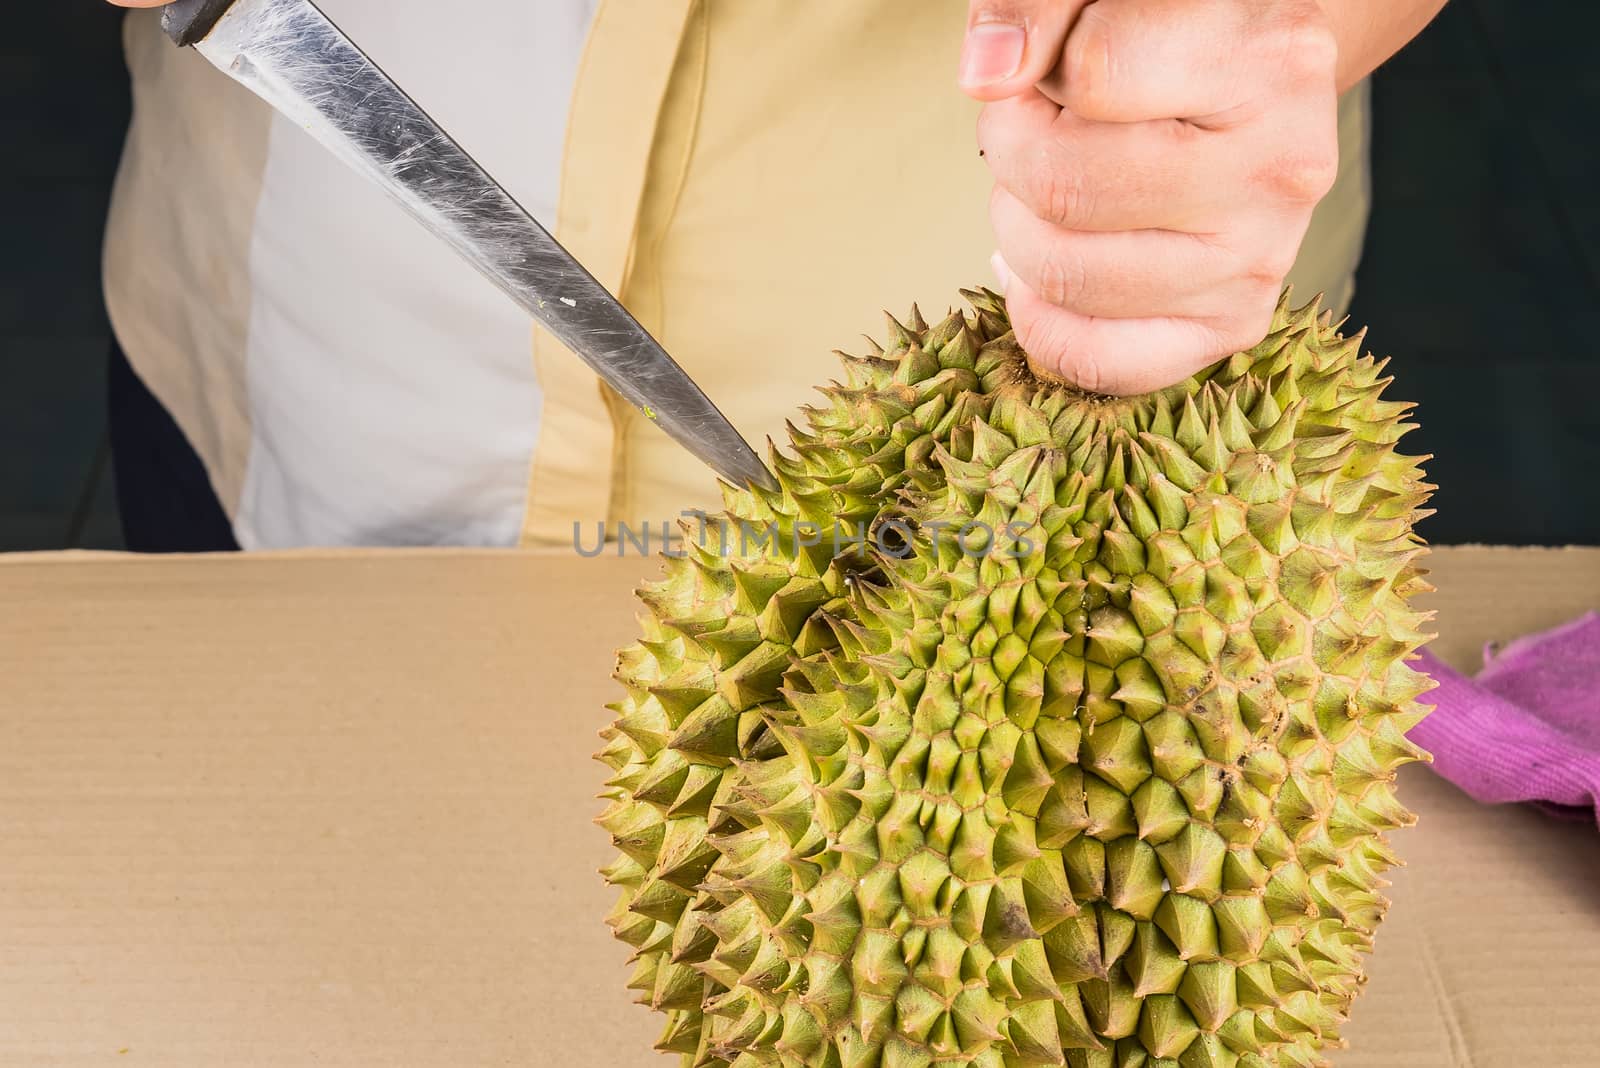 Woman cutting a Durian fruit on the wooden table by using a knif by Bubbers